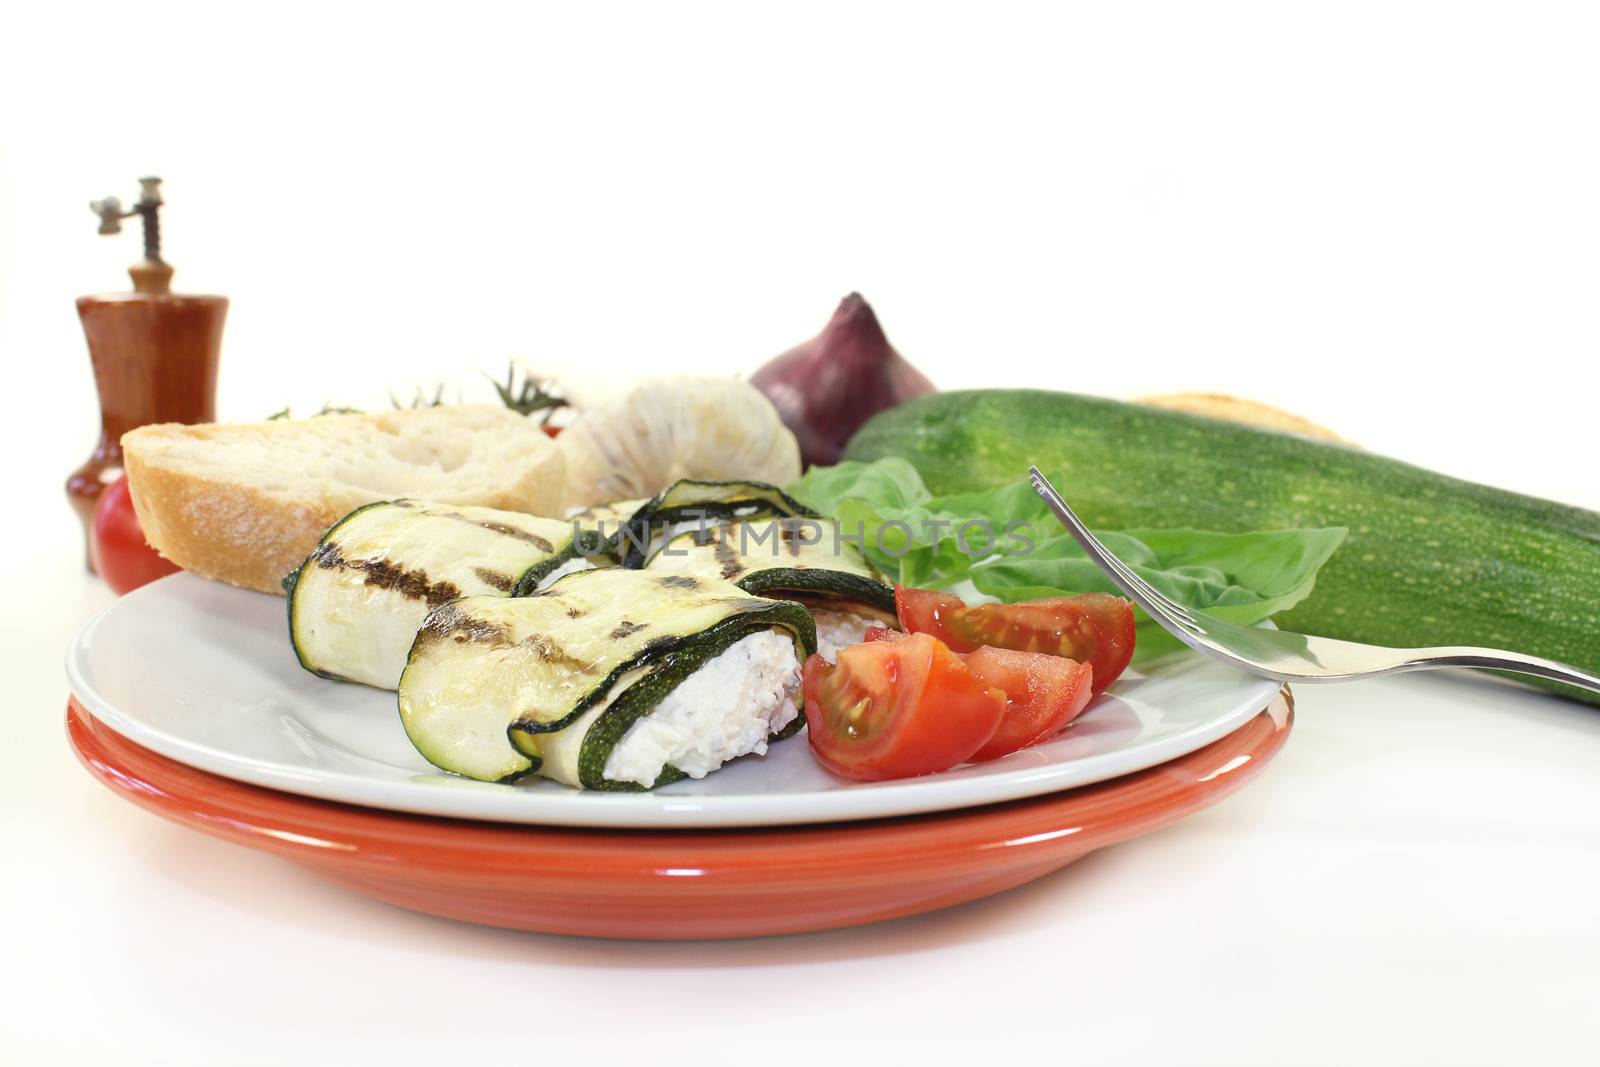 stuffed courgette rolls and tomatoes on a white plate